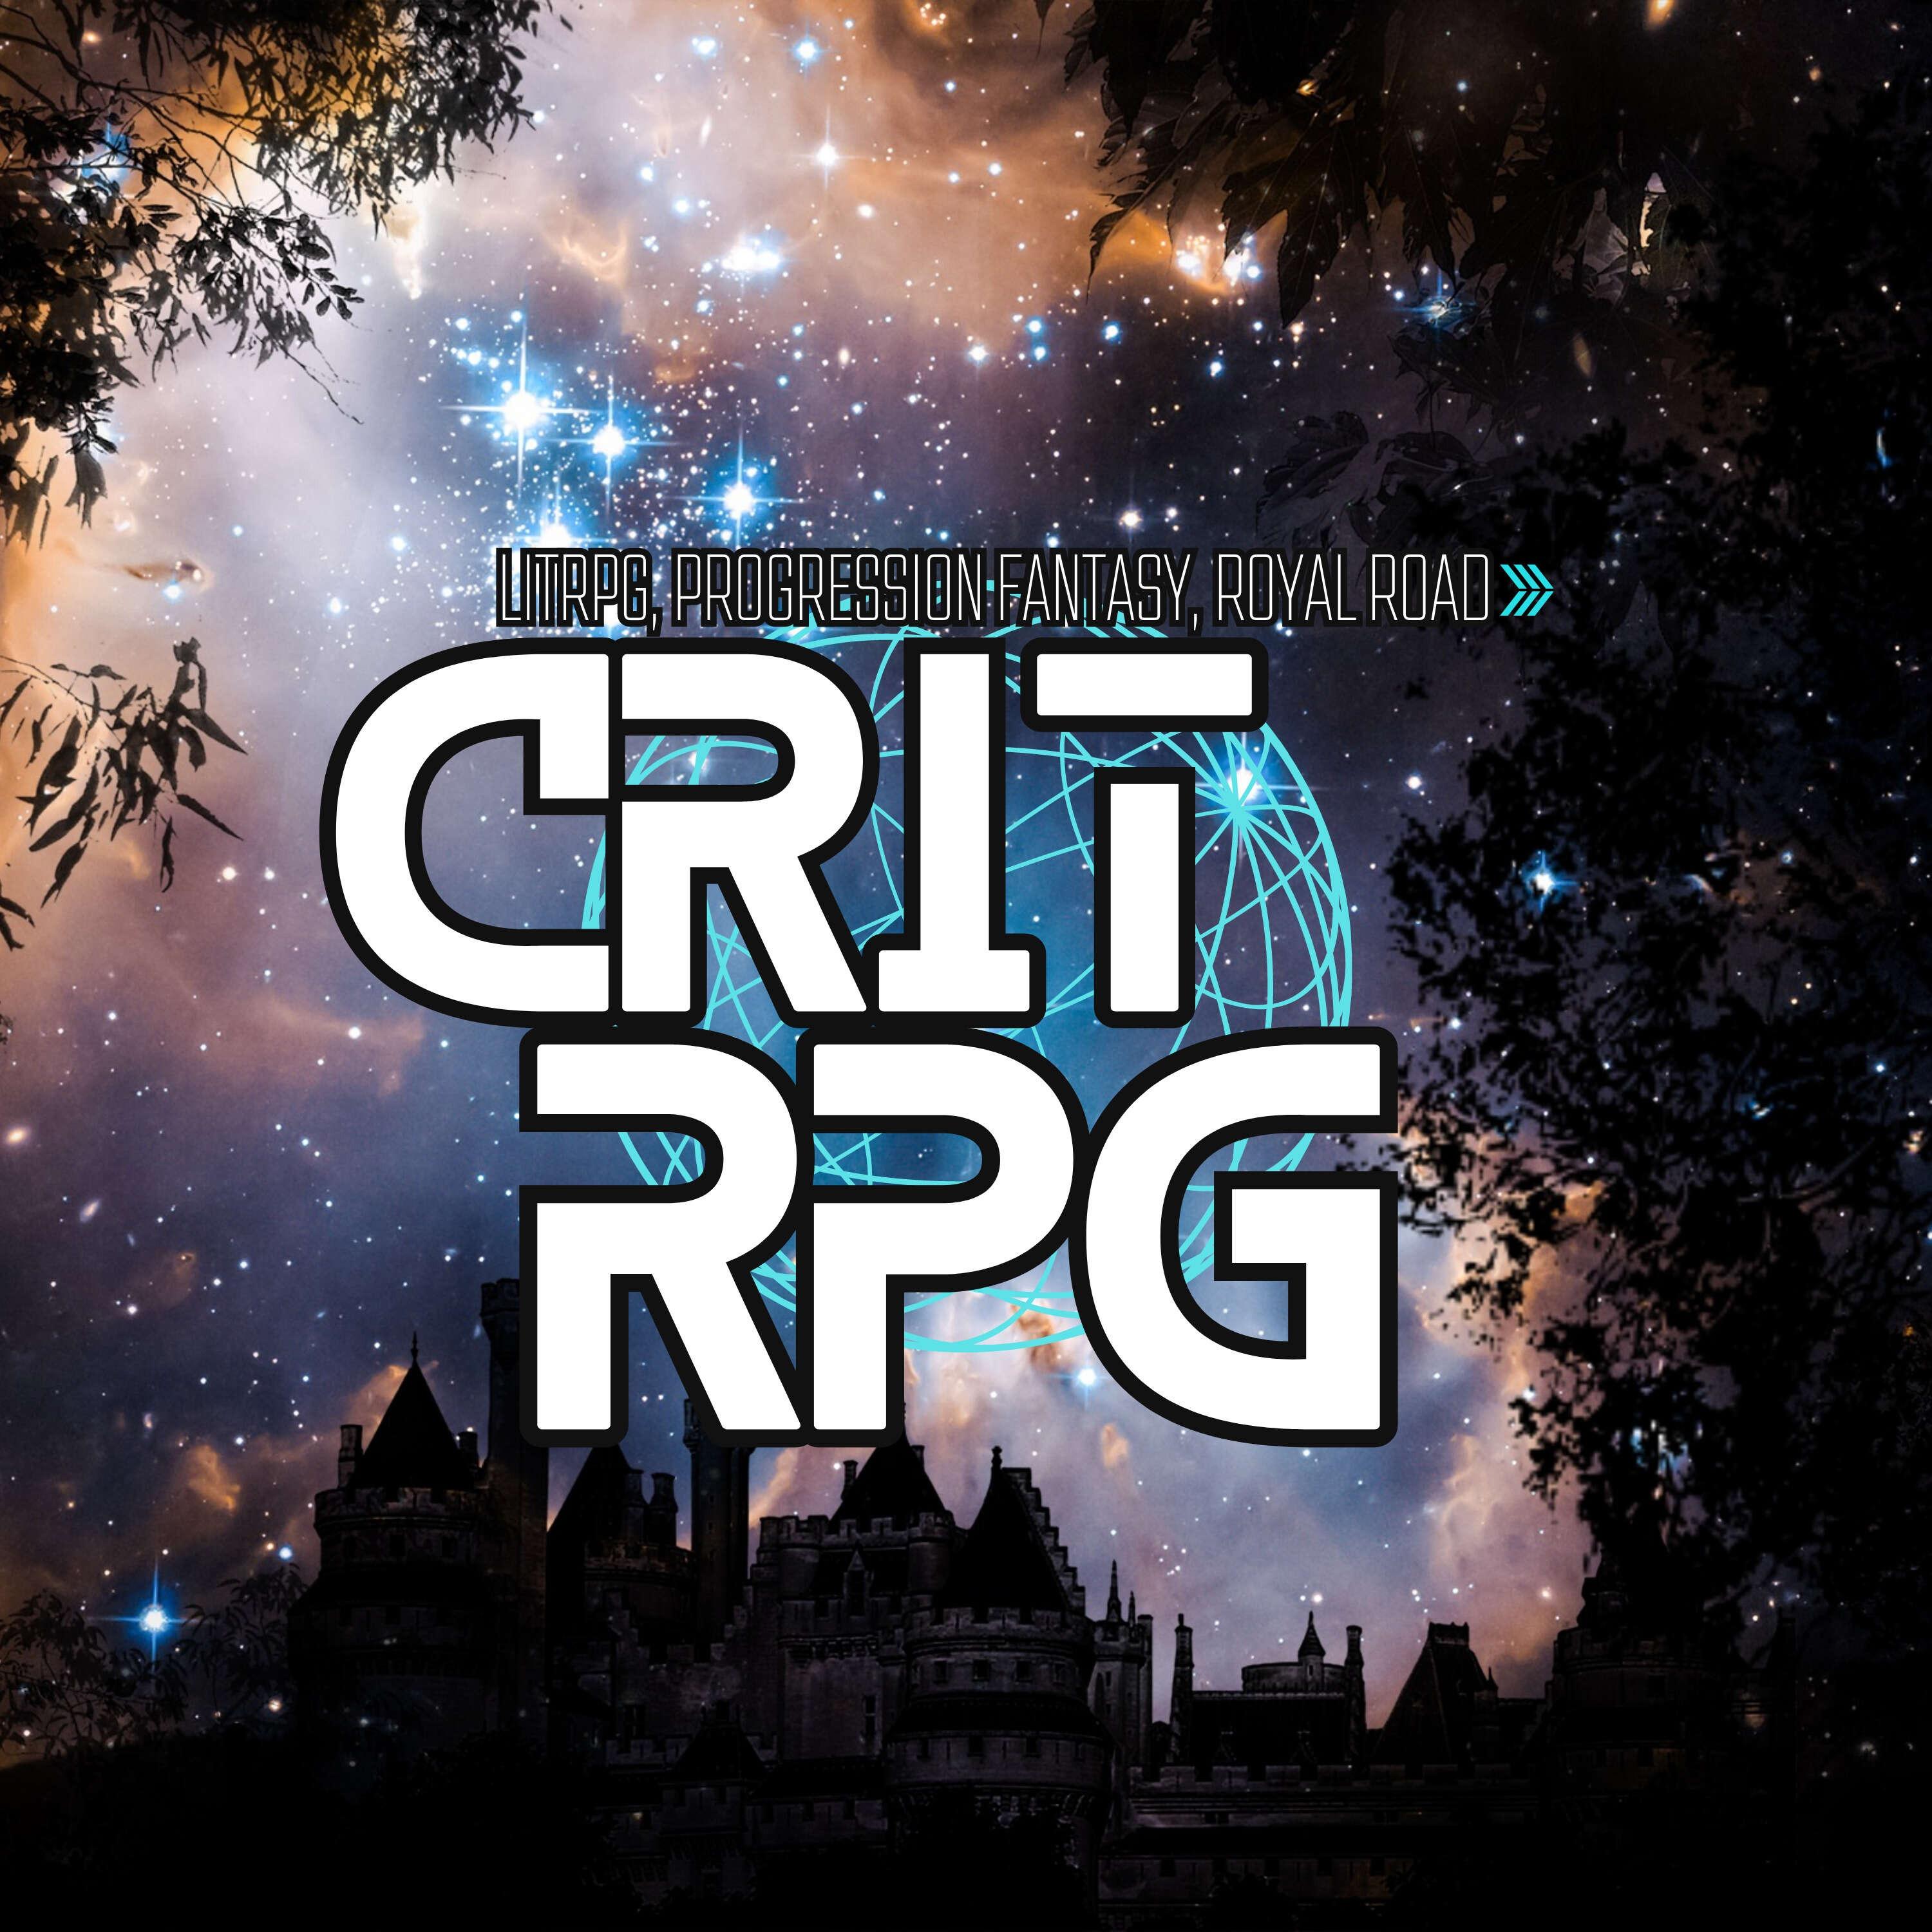 CritRPG - A Podcast about LitRPG, Progression Fantasy, and their authors